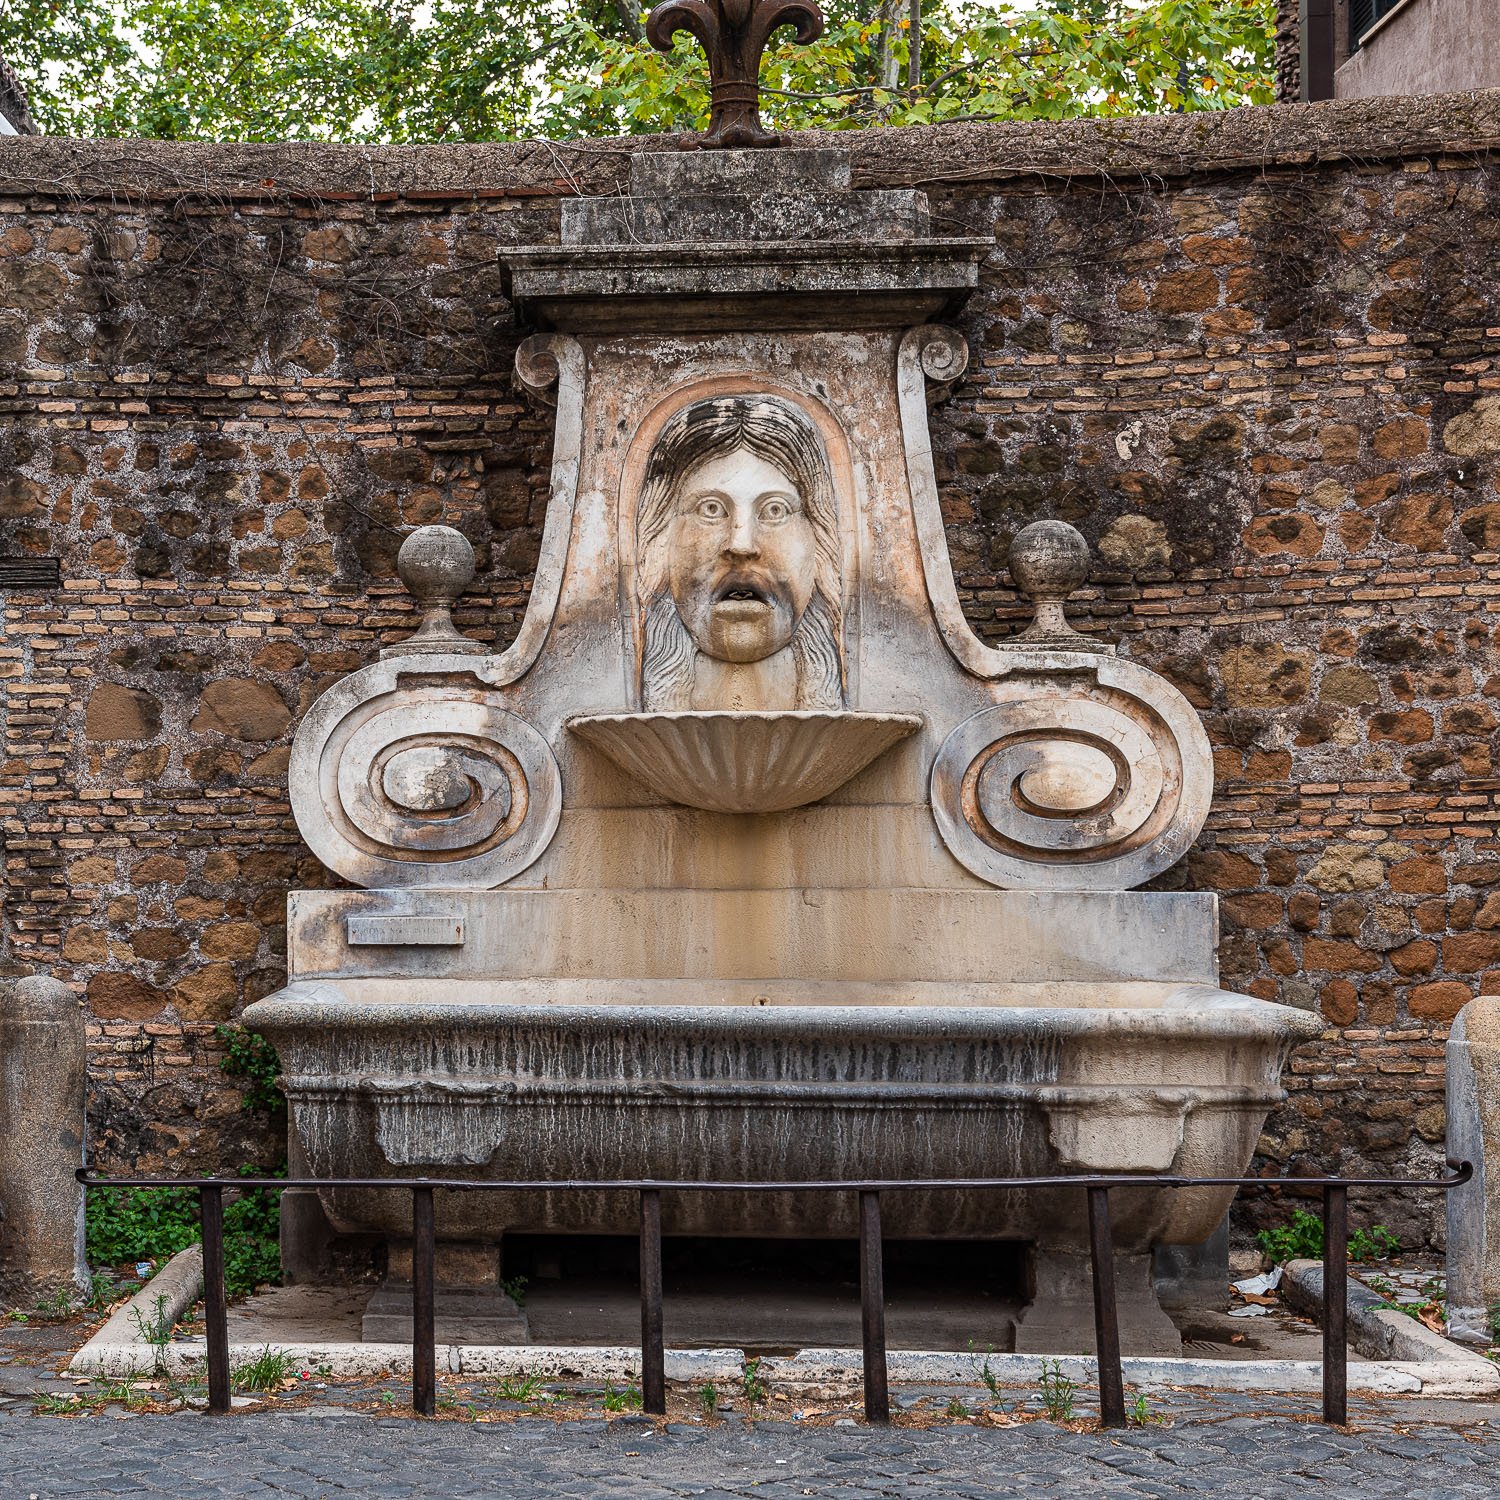 Ancient Roman Fountains - Fountain of the Big Mask